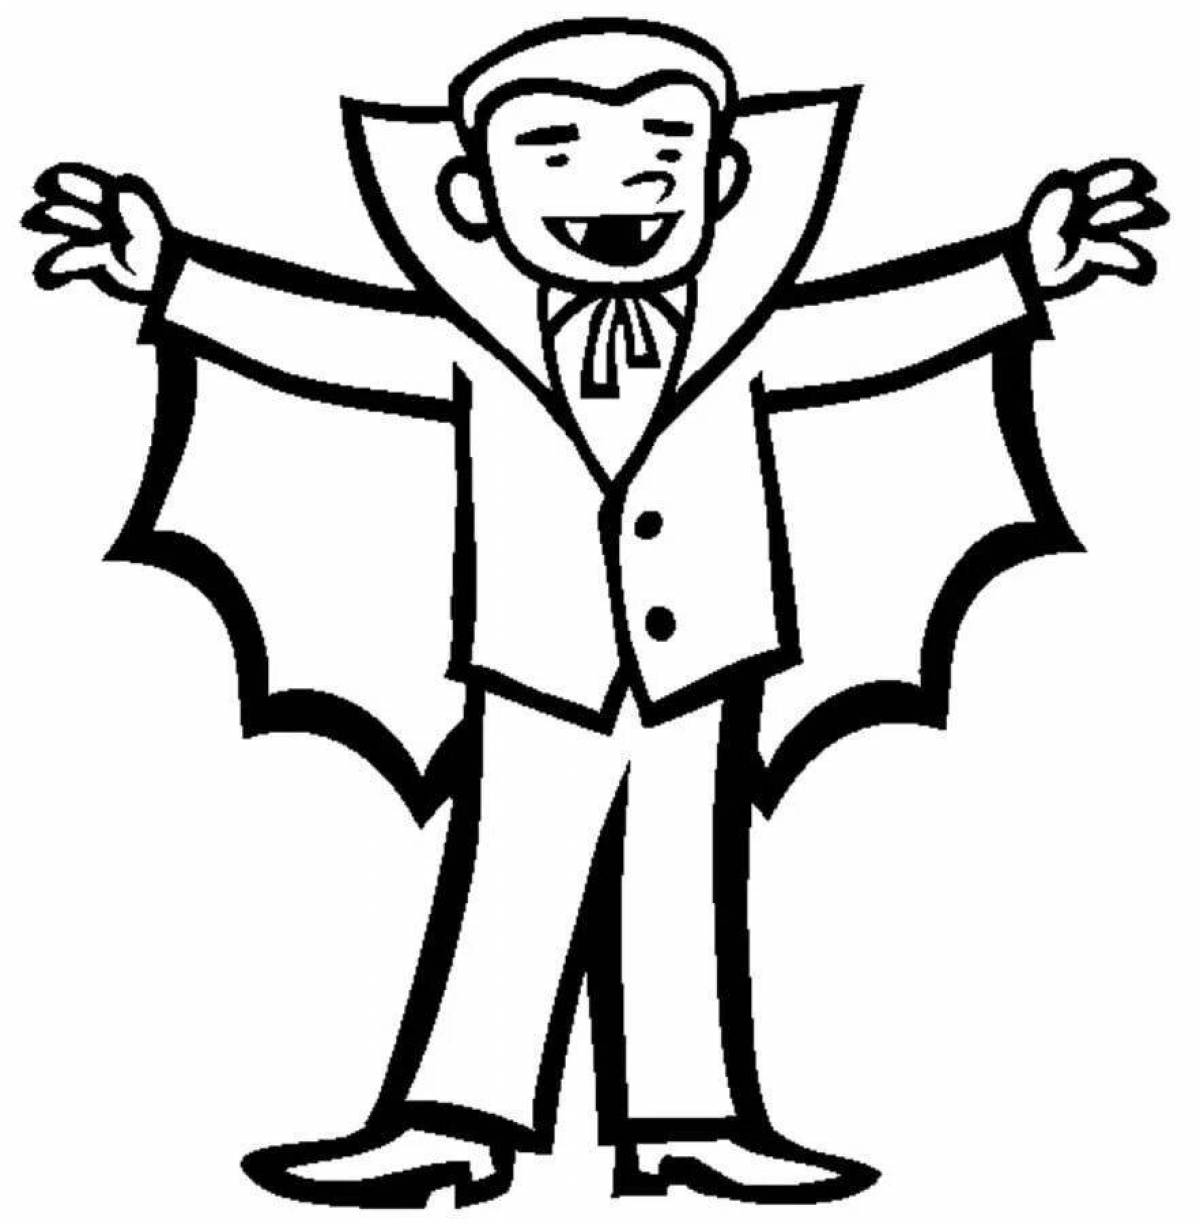 Vampire threatening coloring page for kids